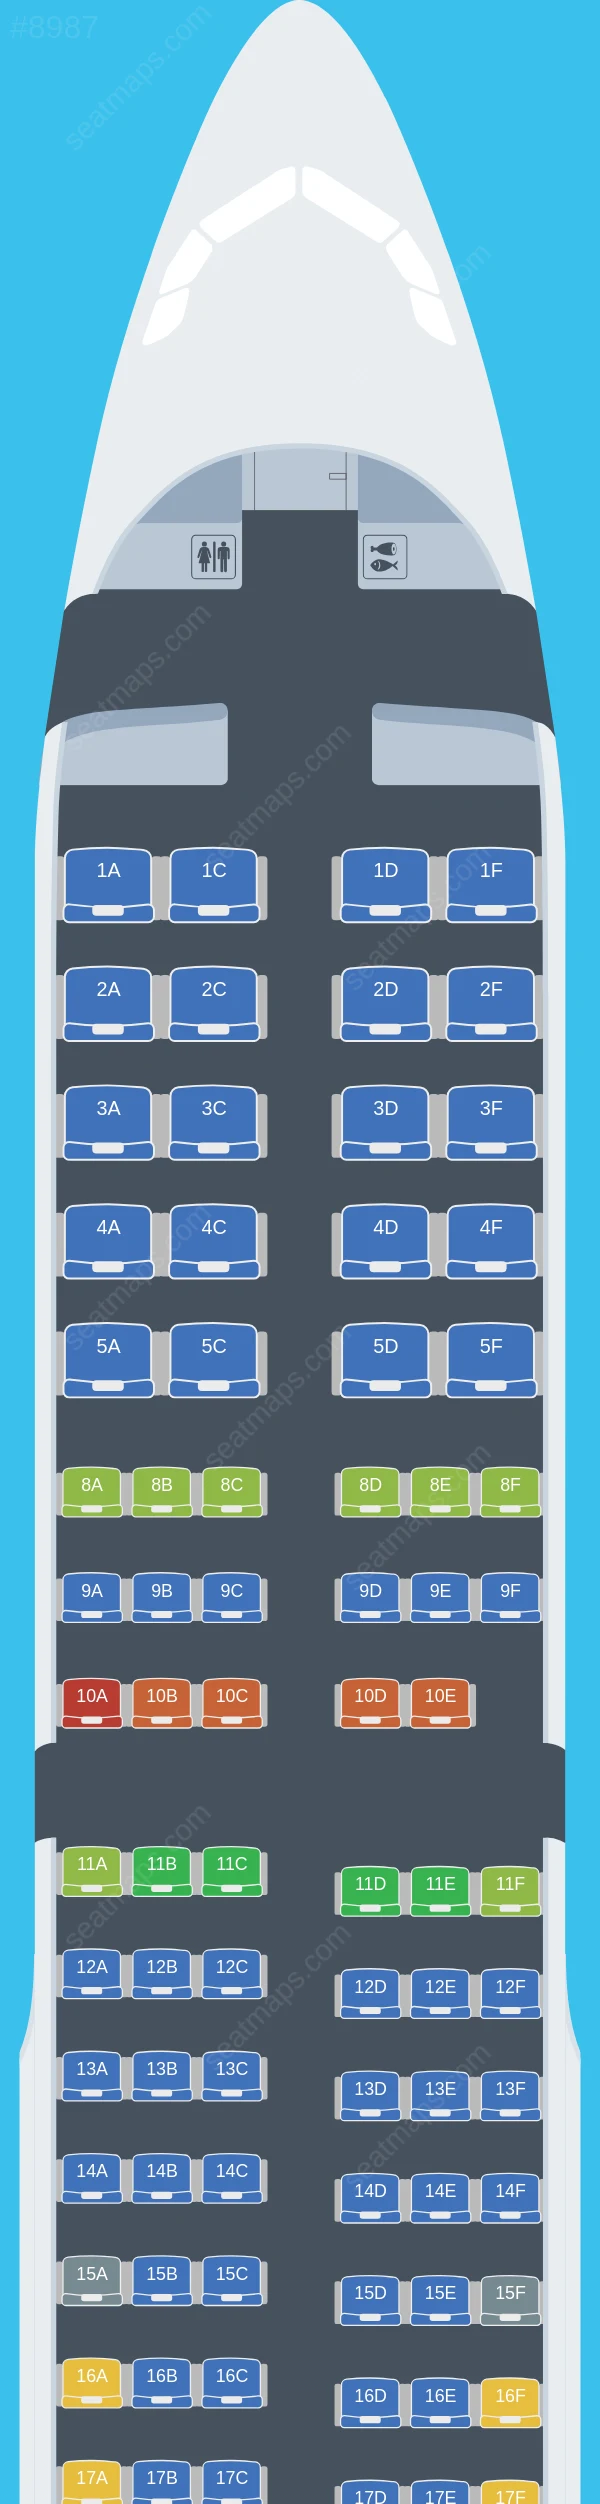 American Airlines Airbus A321-200 V.1 seatmap preview